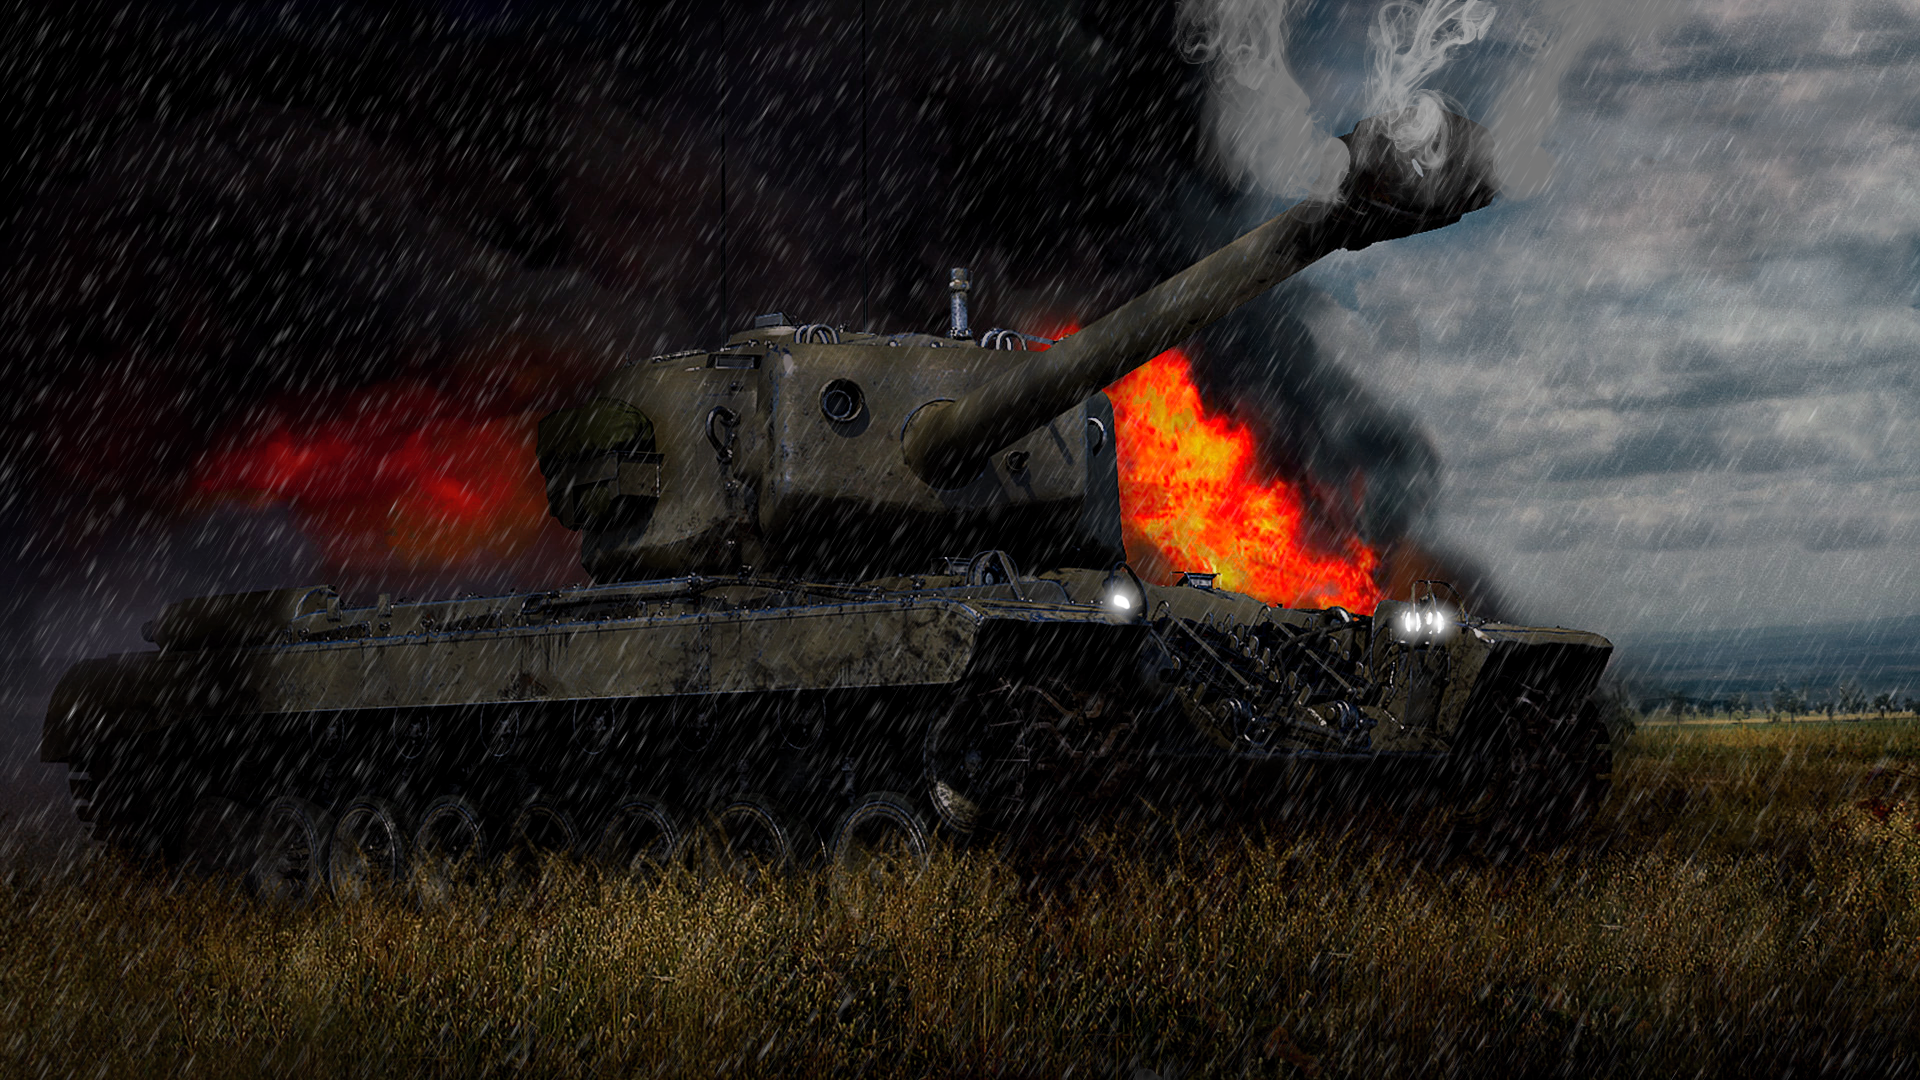 Can I Get Some Tips, Tricks, And Opinions On My Photohopped Picture Of The T 29 Wallpaper That Gaijin Made? I Am Trying To Get Better At Photohopping And I Thought I Could